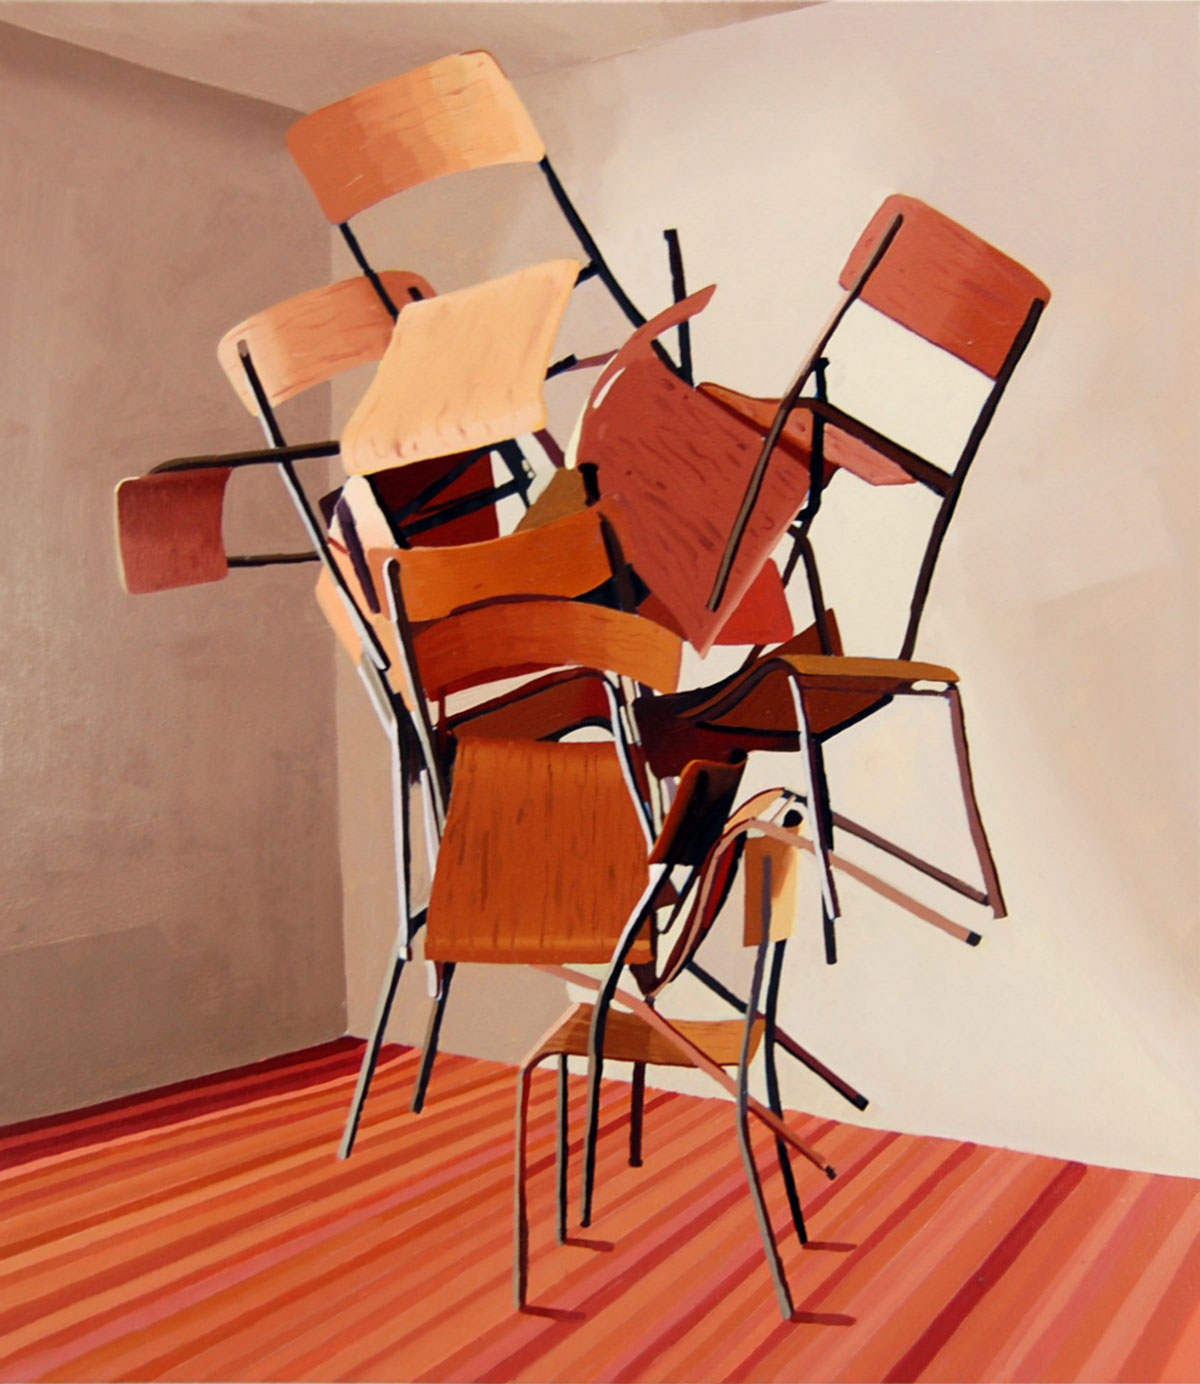 Group of brown chairs stacked atop one another at odd angles